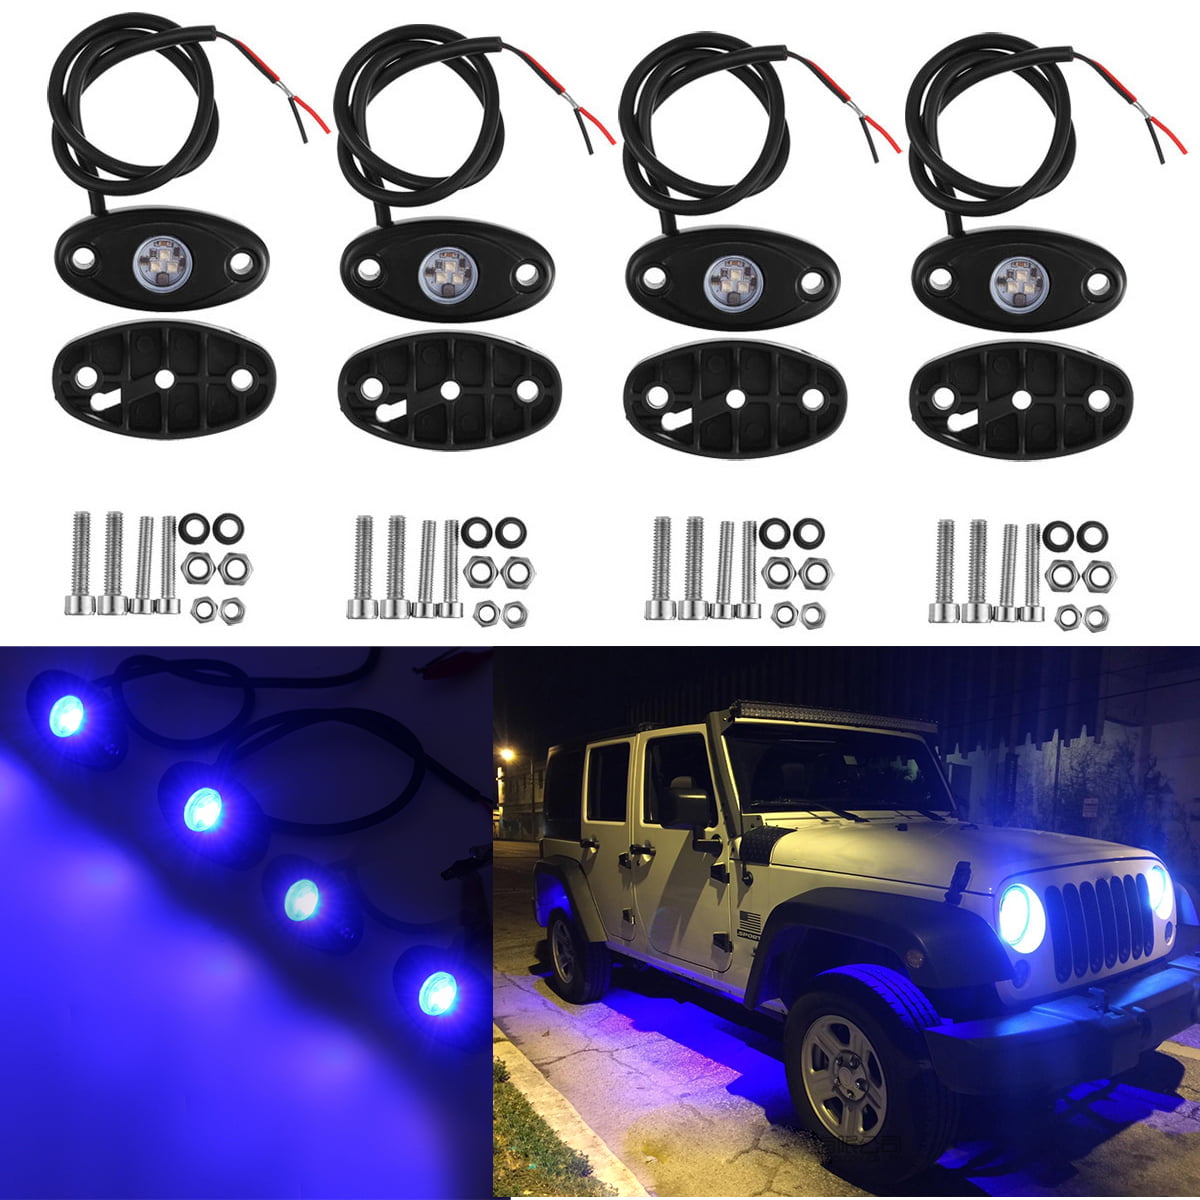 8X 9W 2inch Blue LED Rock Light Offroad Wrangle Truck Underbody Trail Rig Lights 